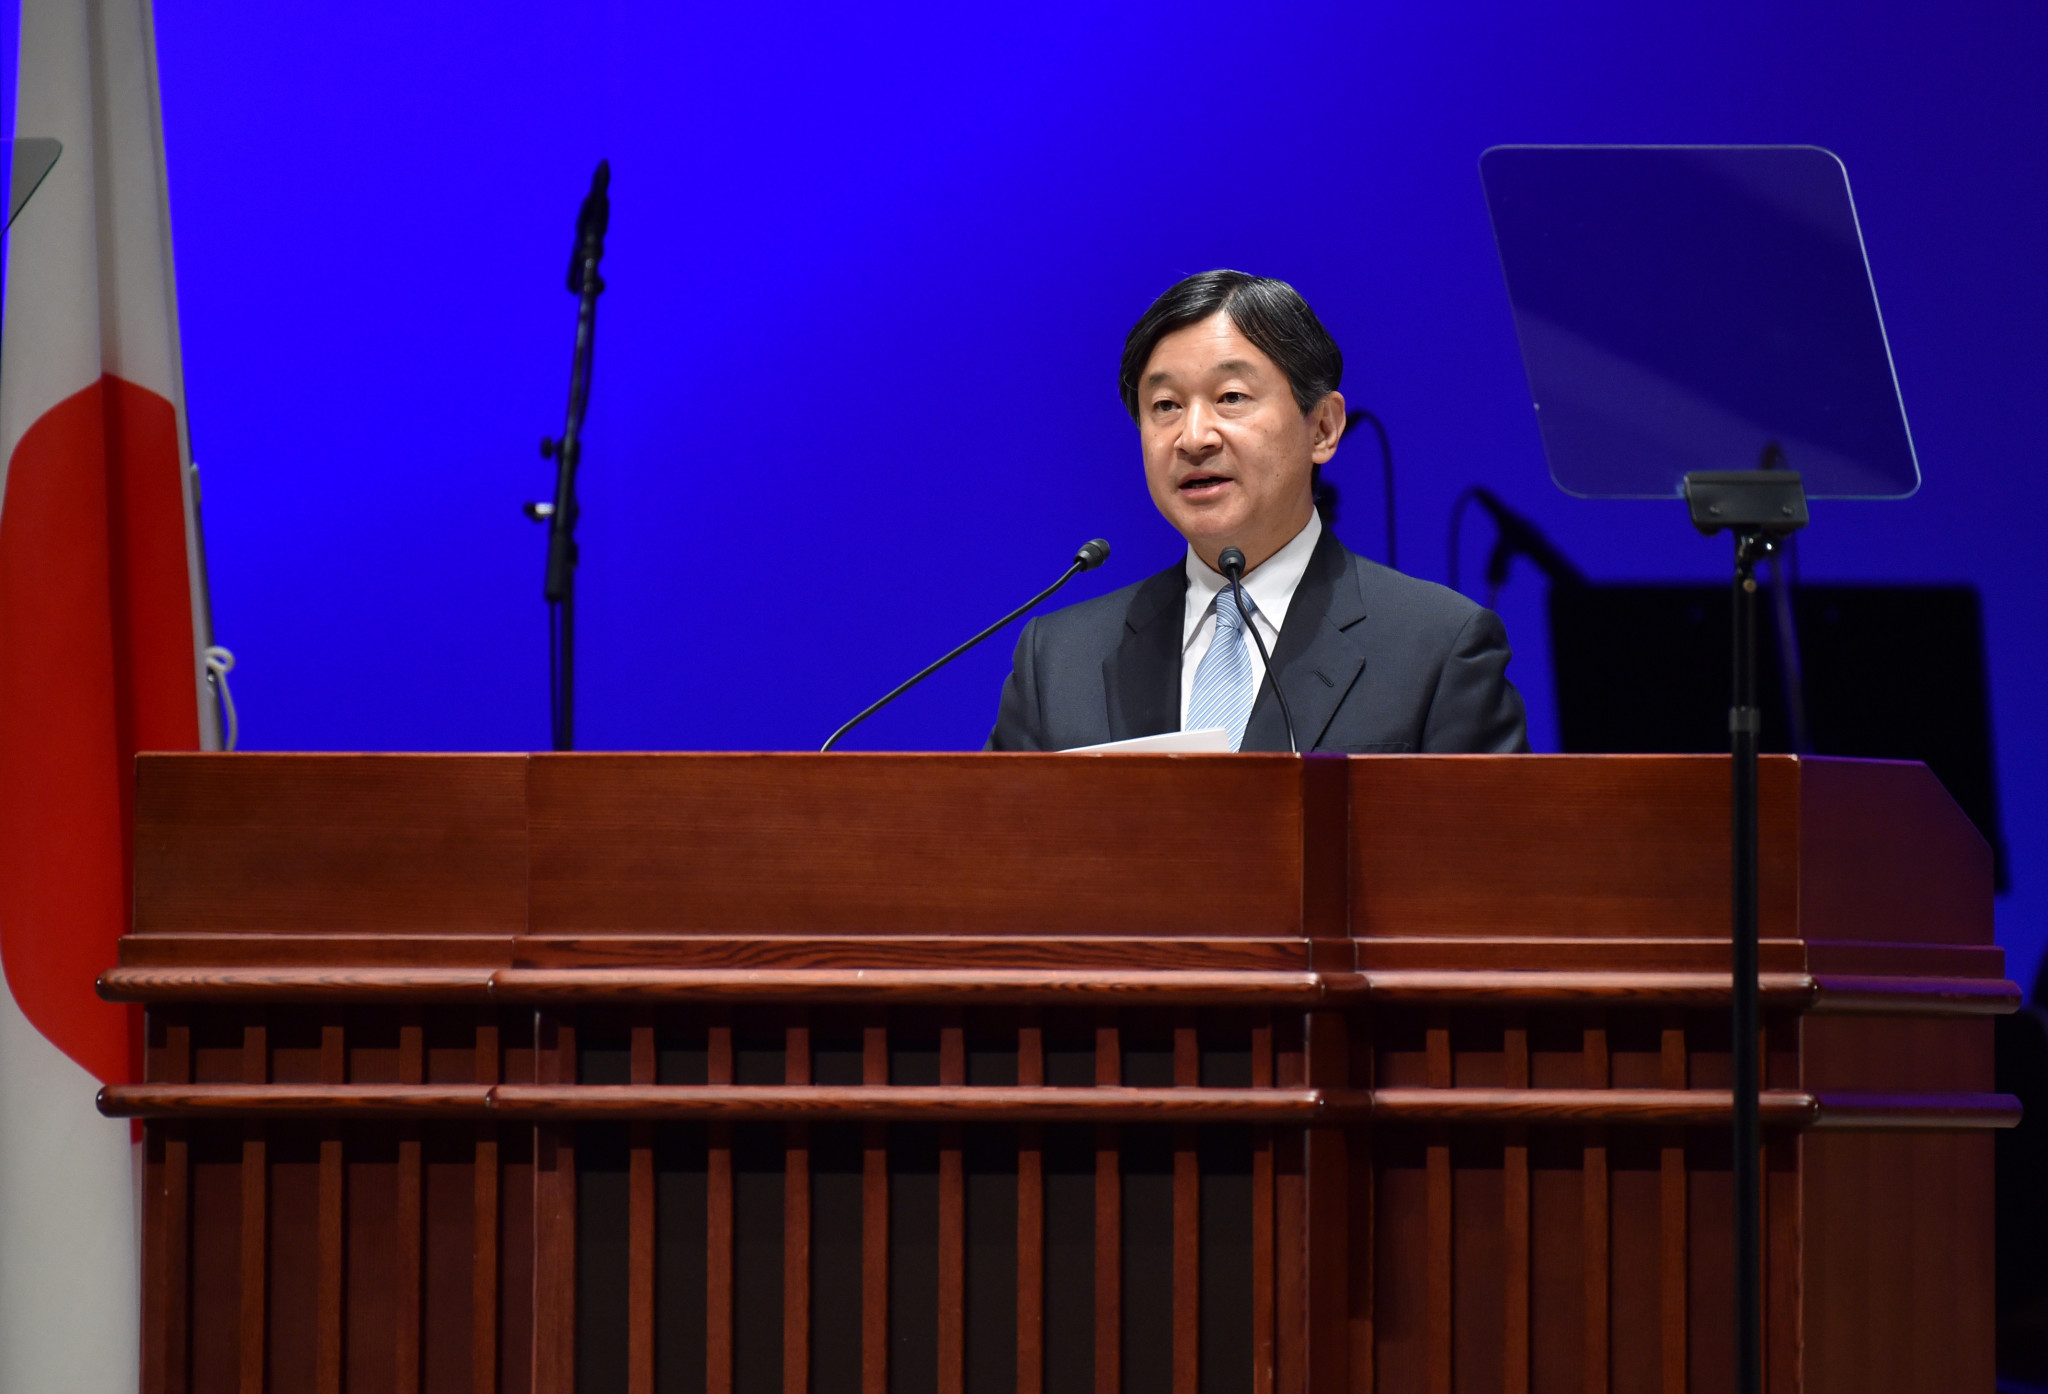 Japanese Crown Prince Naruhito is now in line to open Tokyo 2020 ©Getty Images